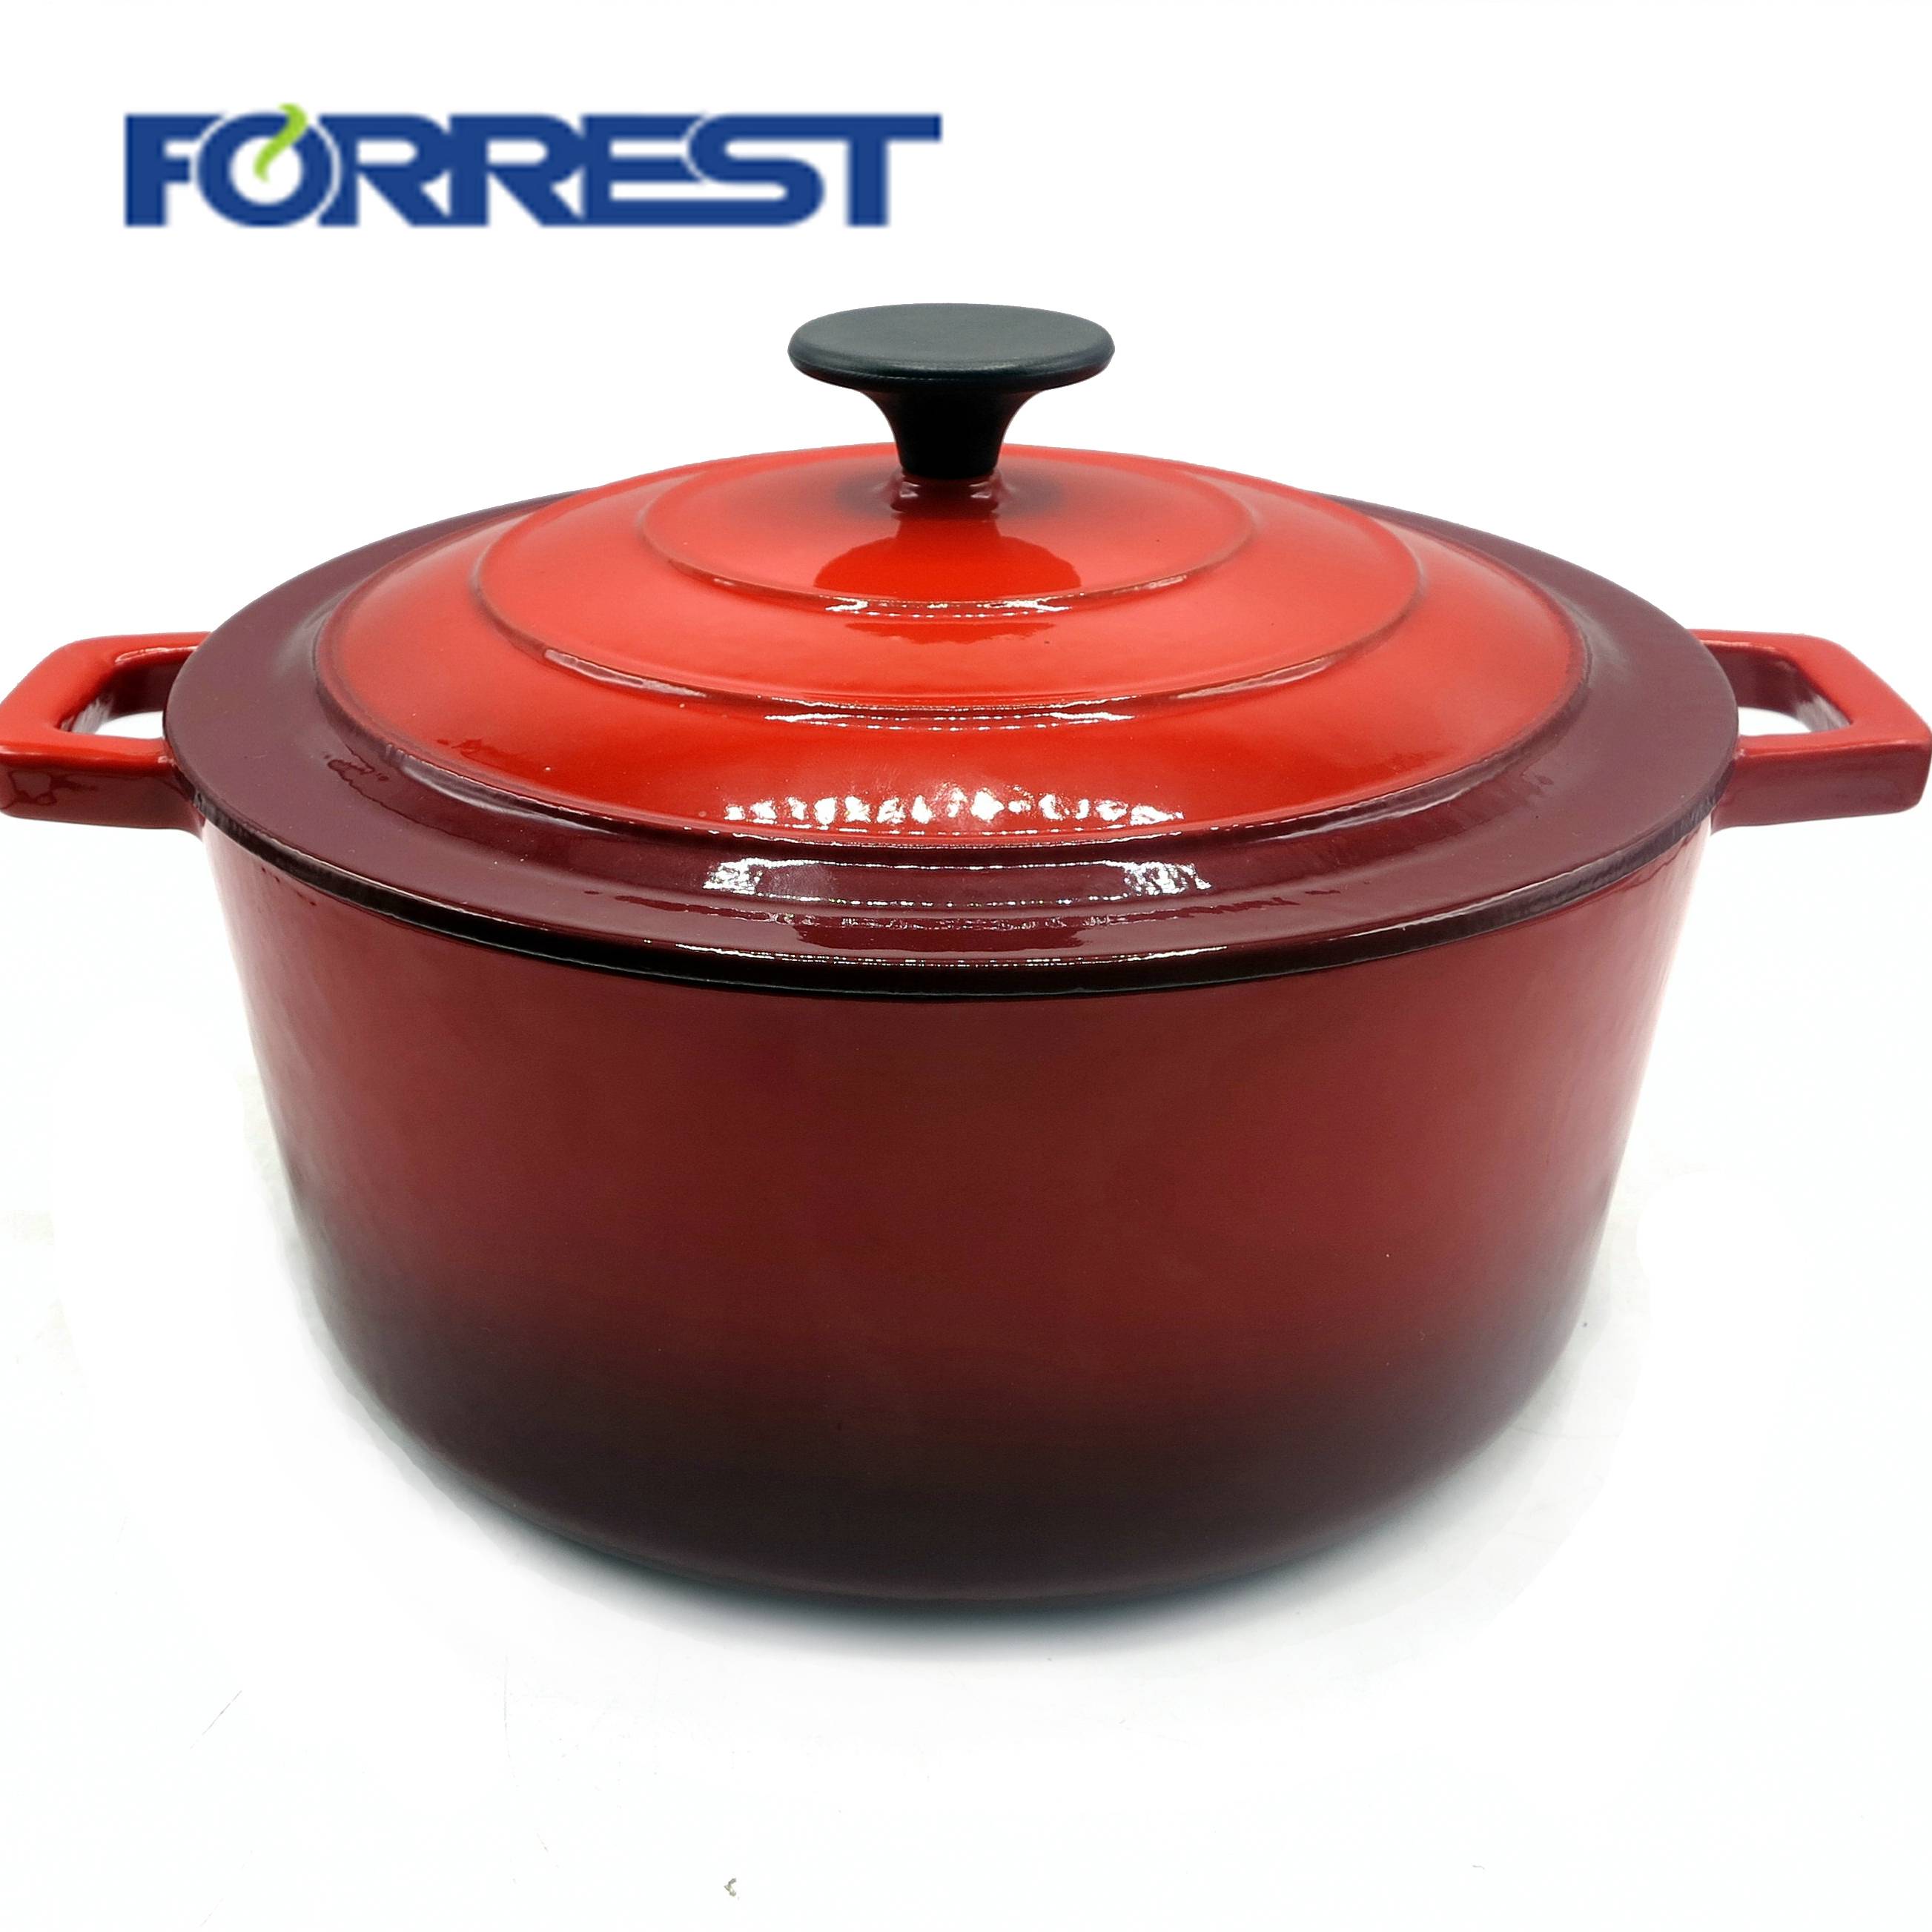 Low MOQ for Enamel Casserole - Amazon Hot sale  enamel cookware set insulated food warmer cast iron casserole for kitchen cooking delicious food dia 25.5CM – Forrest